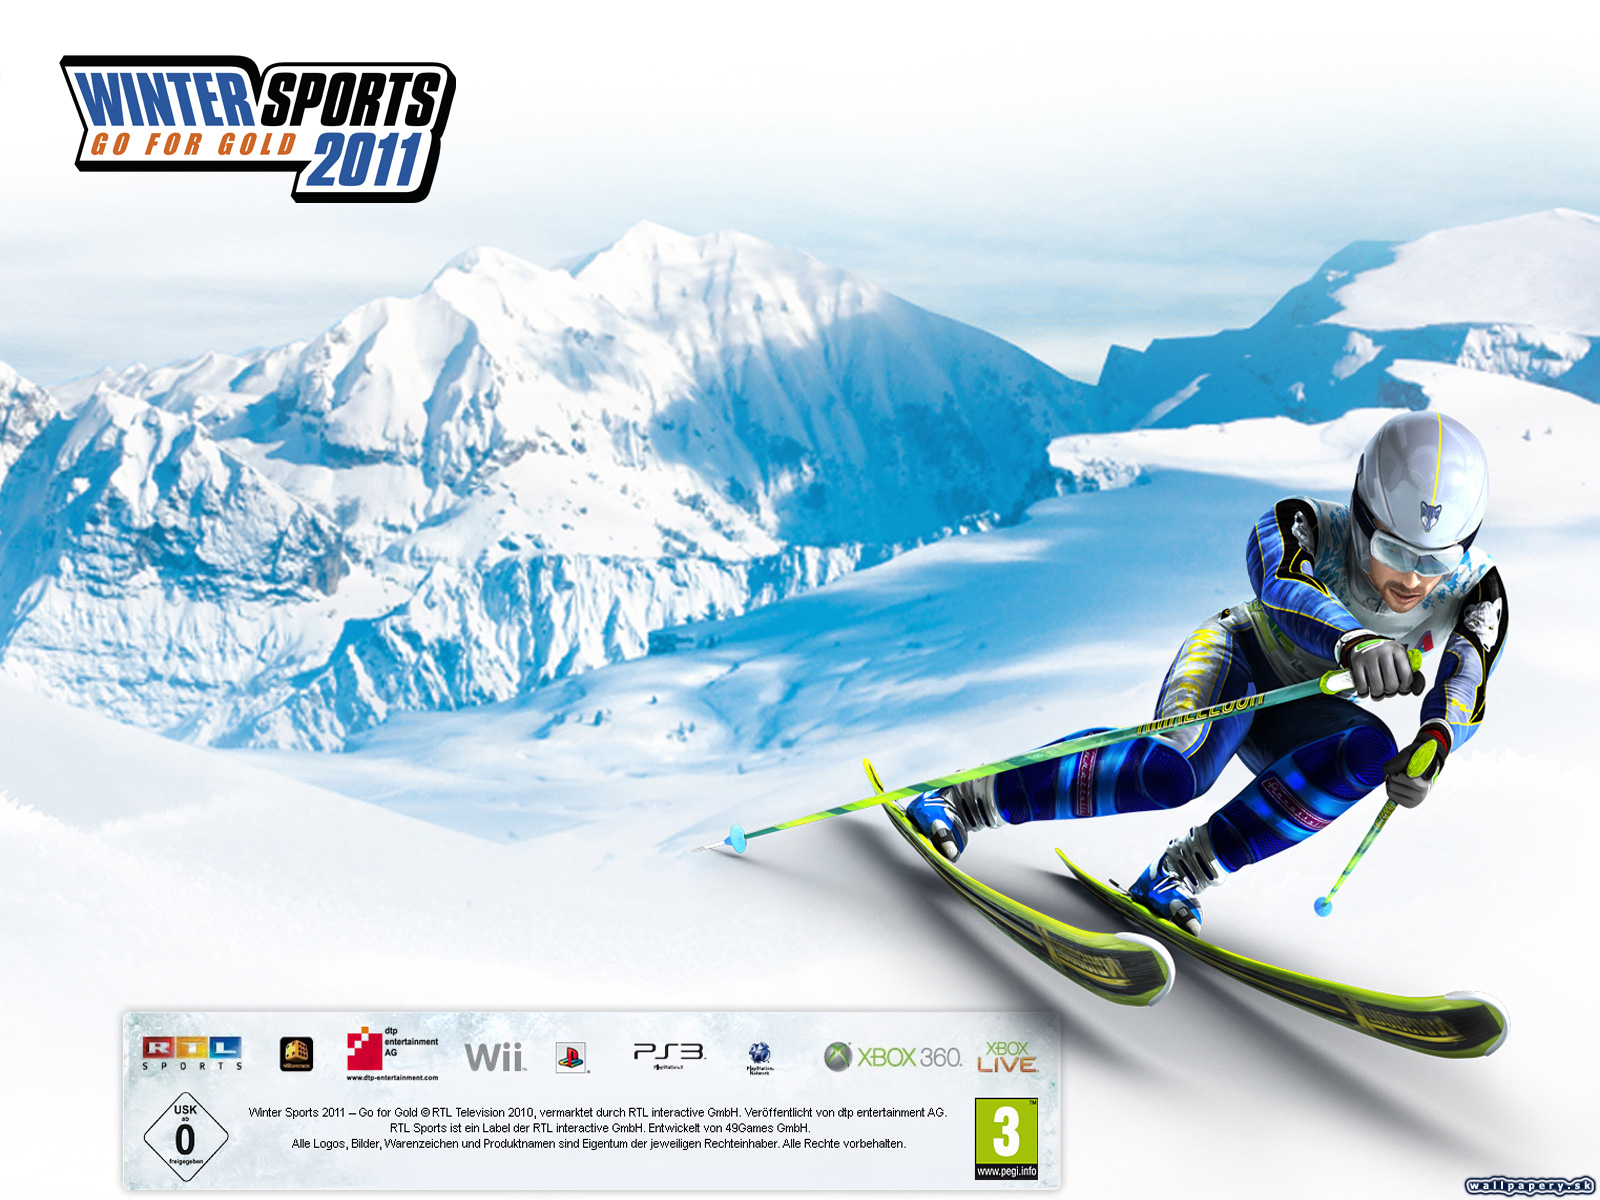 Winter Sports 2011: Go for Gold - wallpaper 1